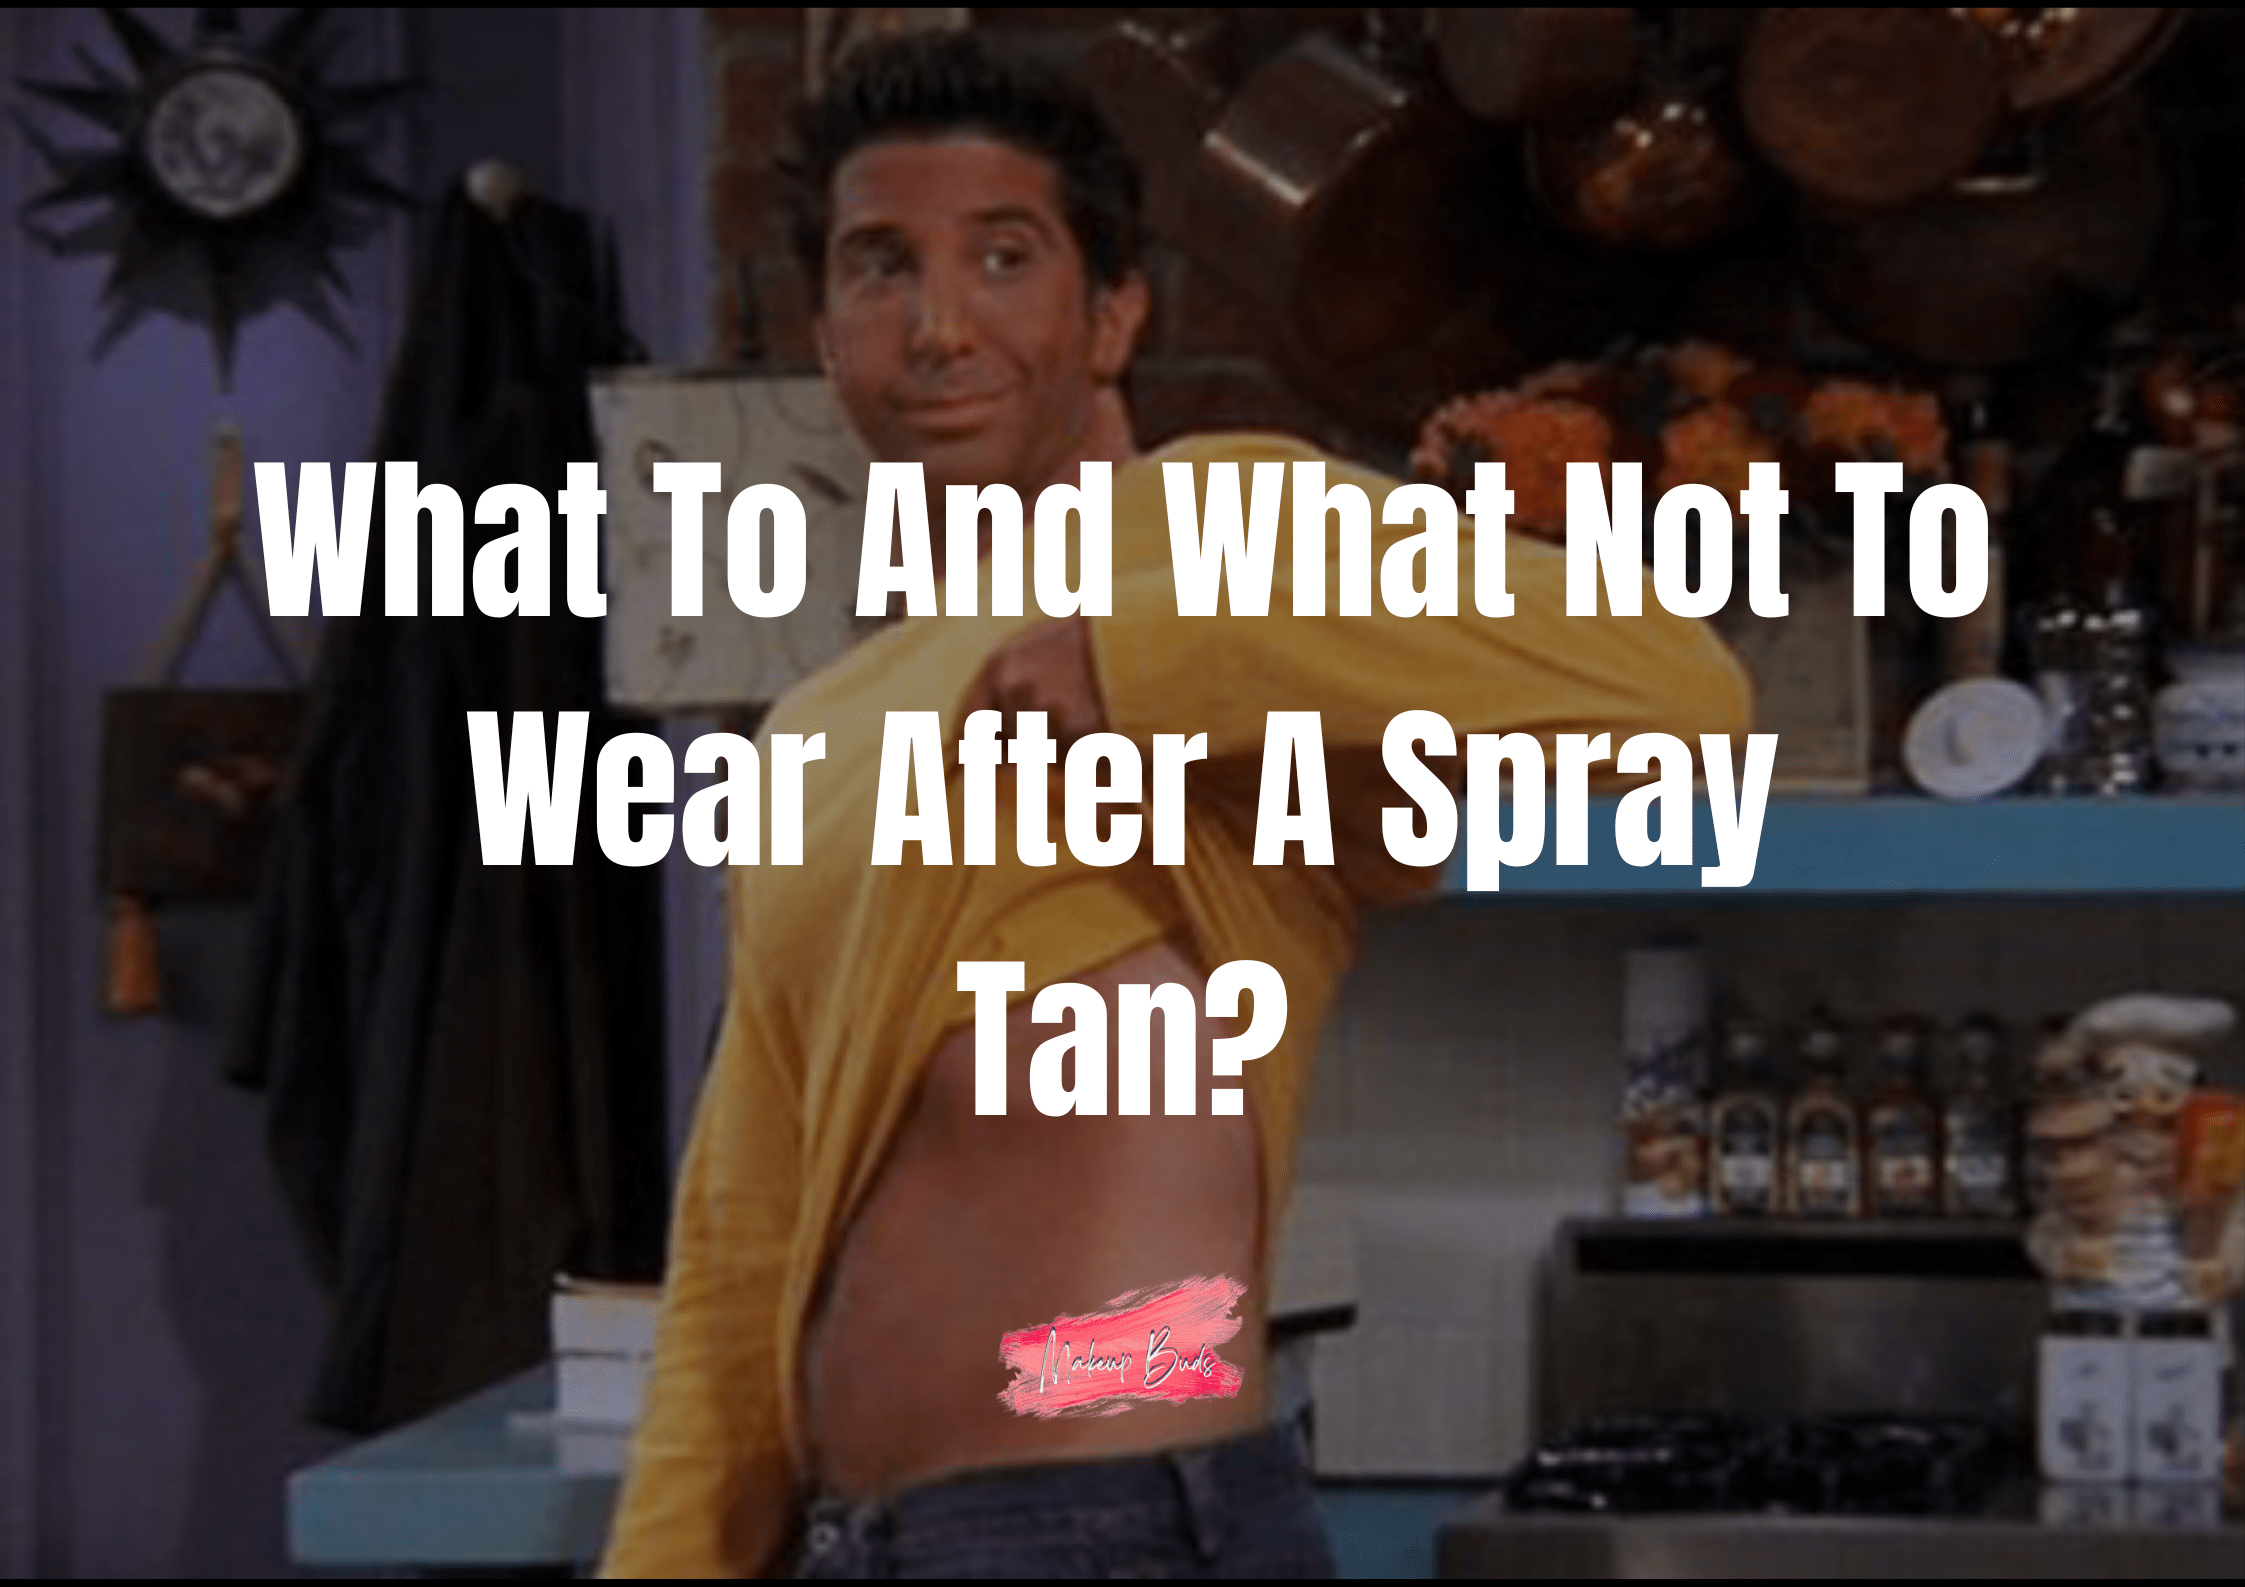 What To Wear After A Spray Tan